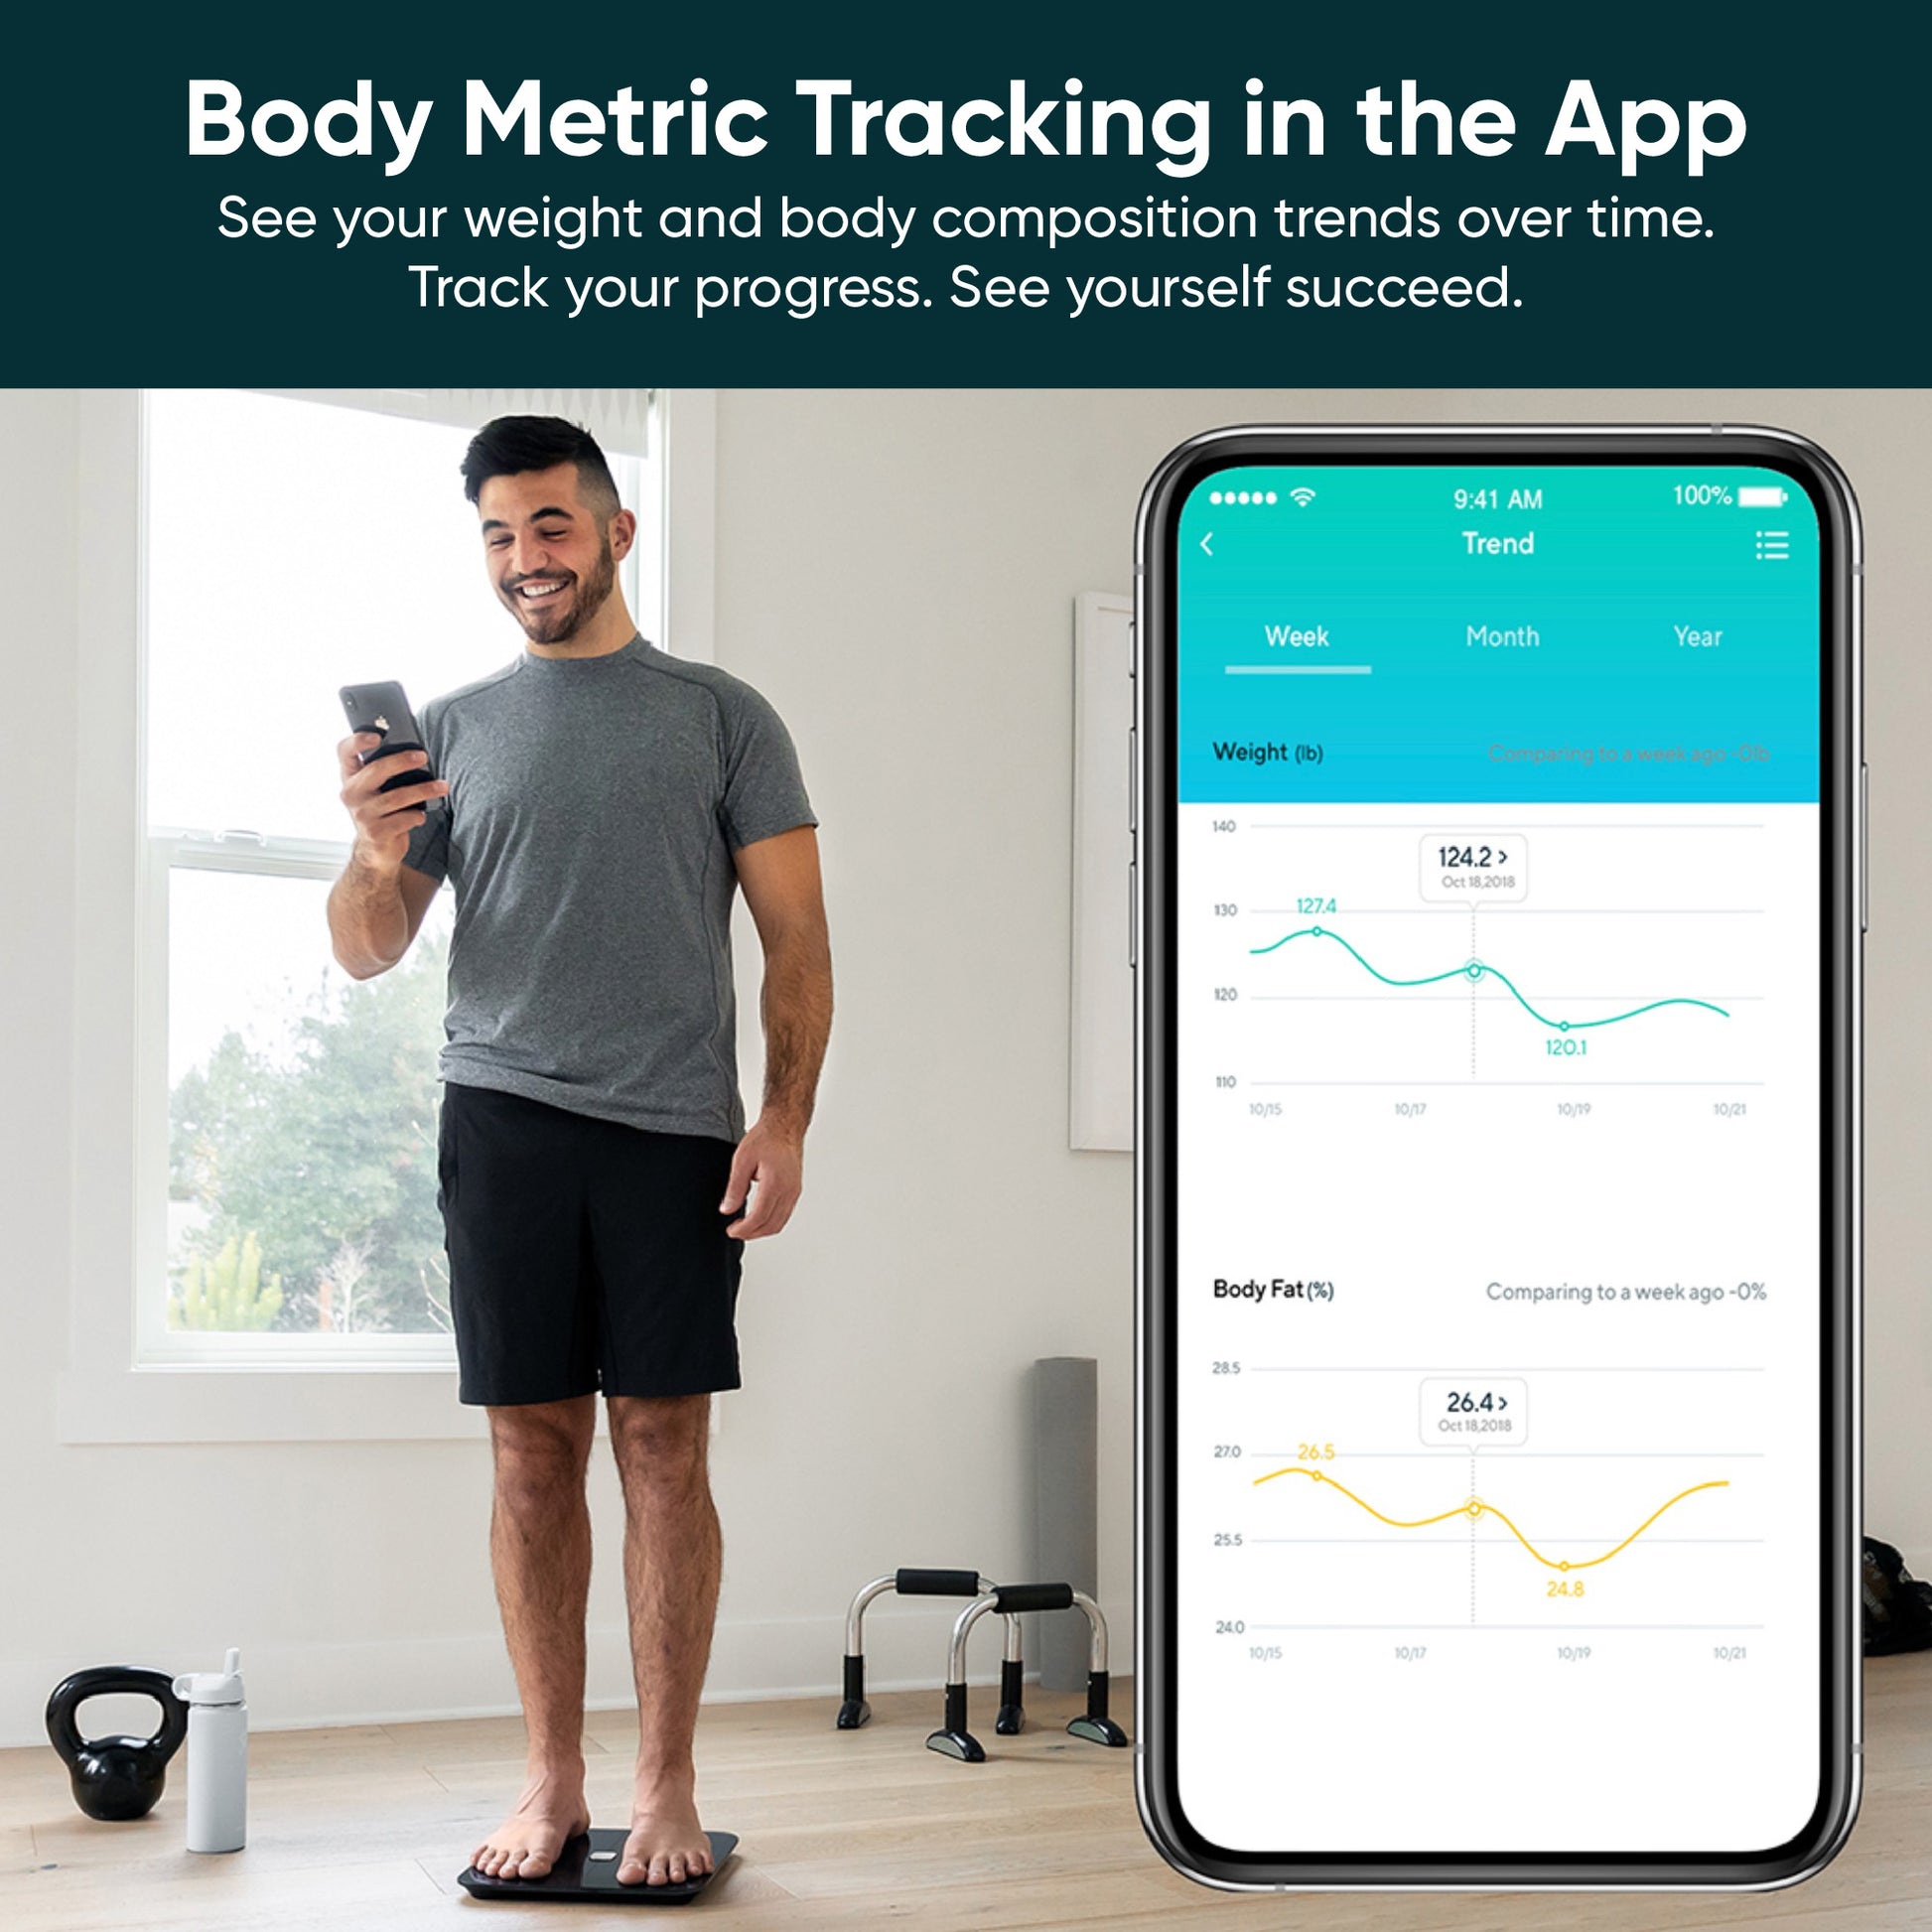 Track your weight, muscle mass, BMI, and more with this smart scale